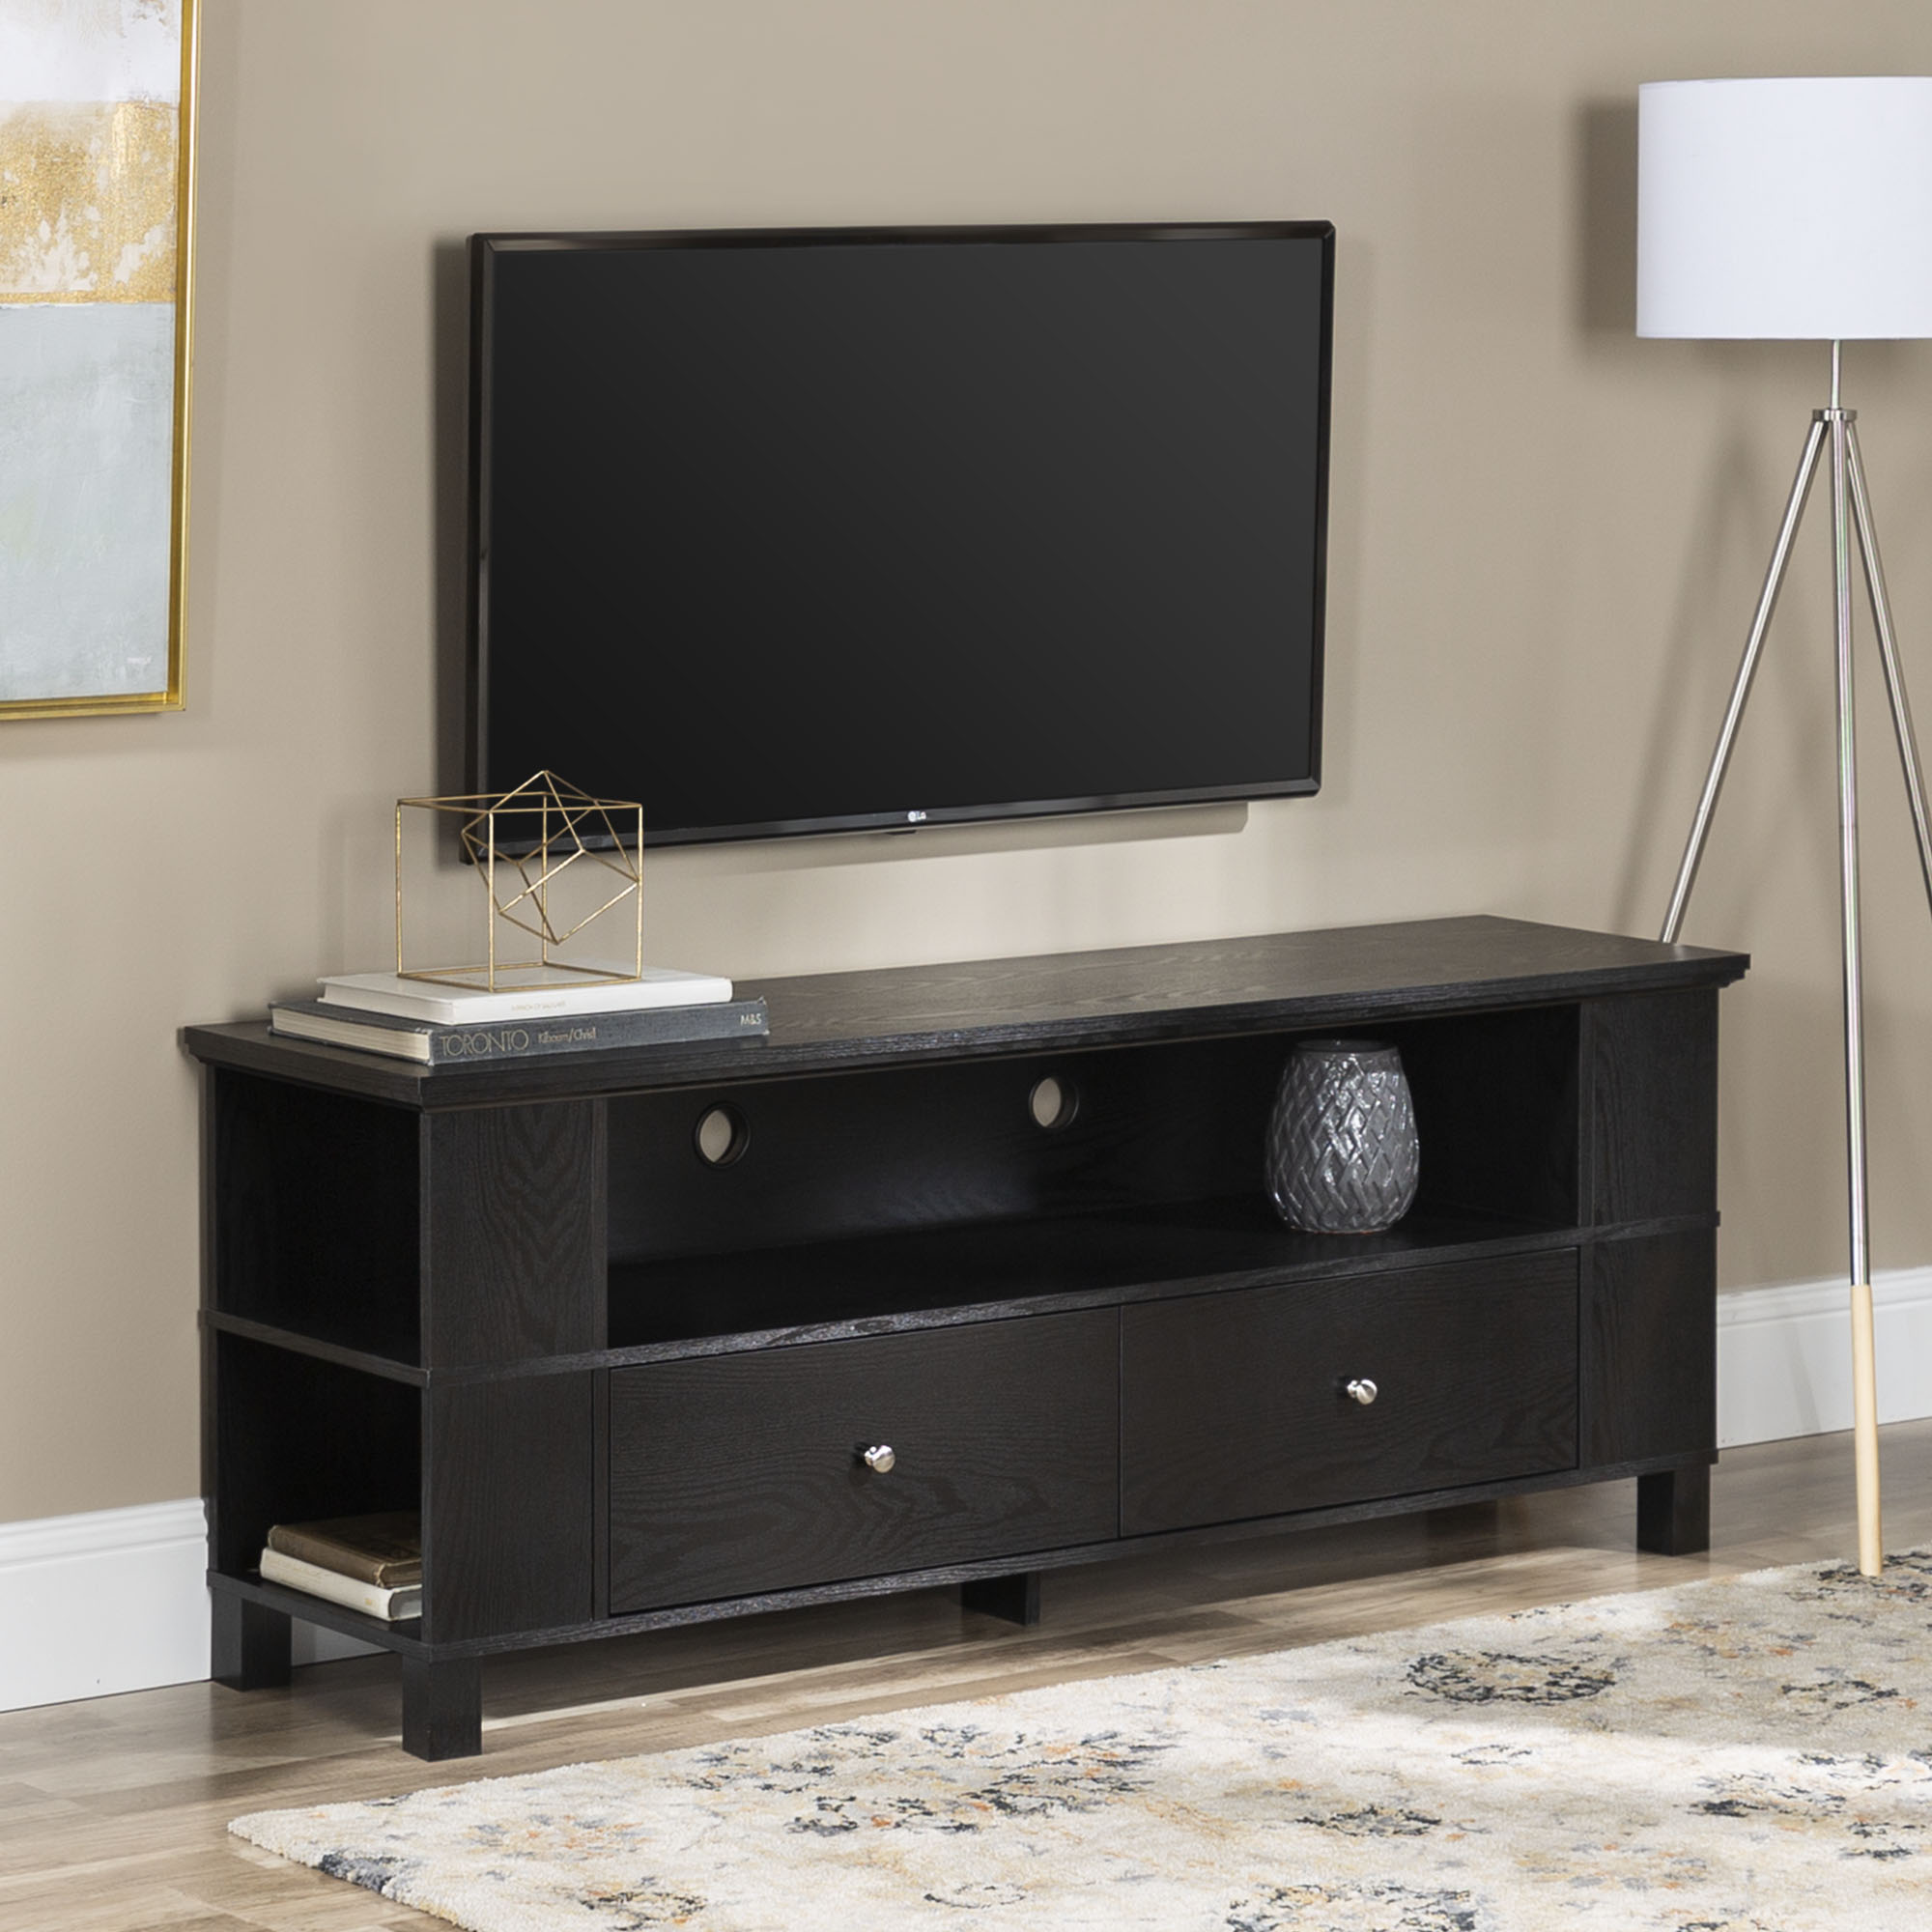 65 Inch Tv Stand with Fireplace Best Of Walker Edison Wood Tv Stands for Tv S Up to 65" Black